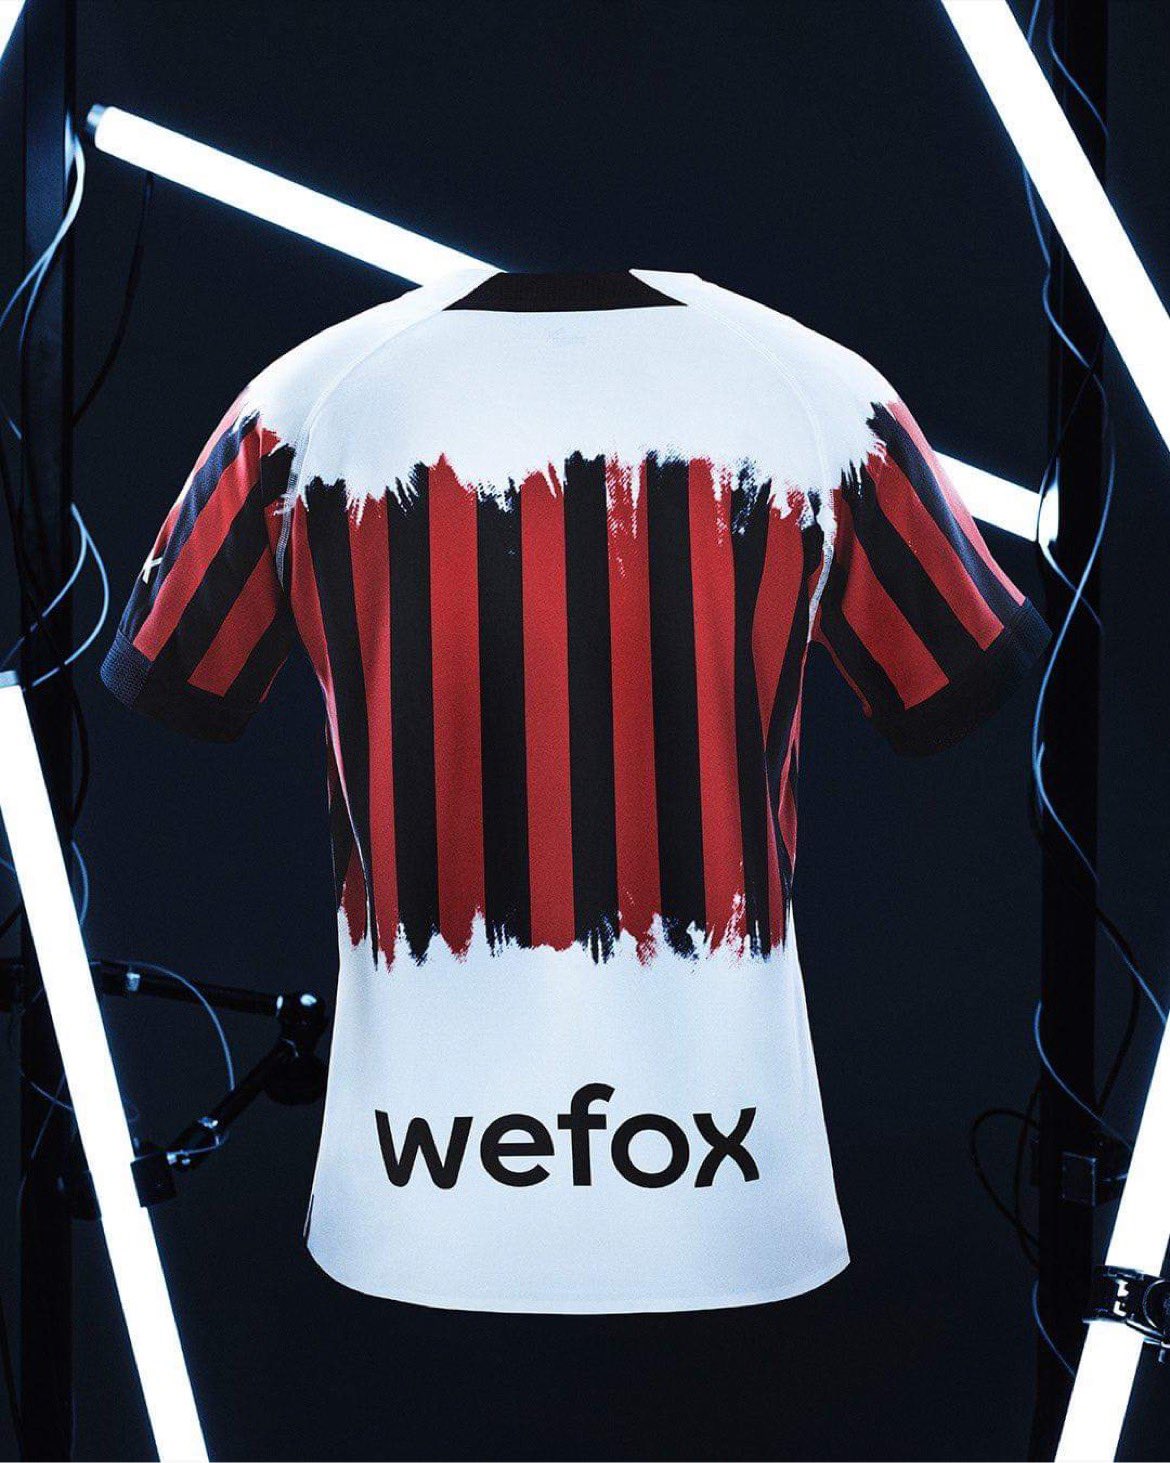 LEAKED: AC Milan Set To Release Fourth Kit In Collaboration With